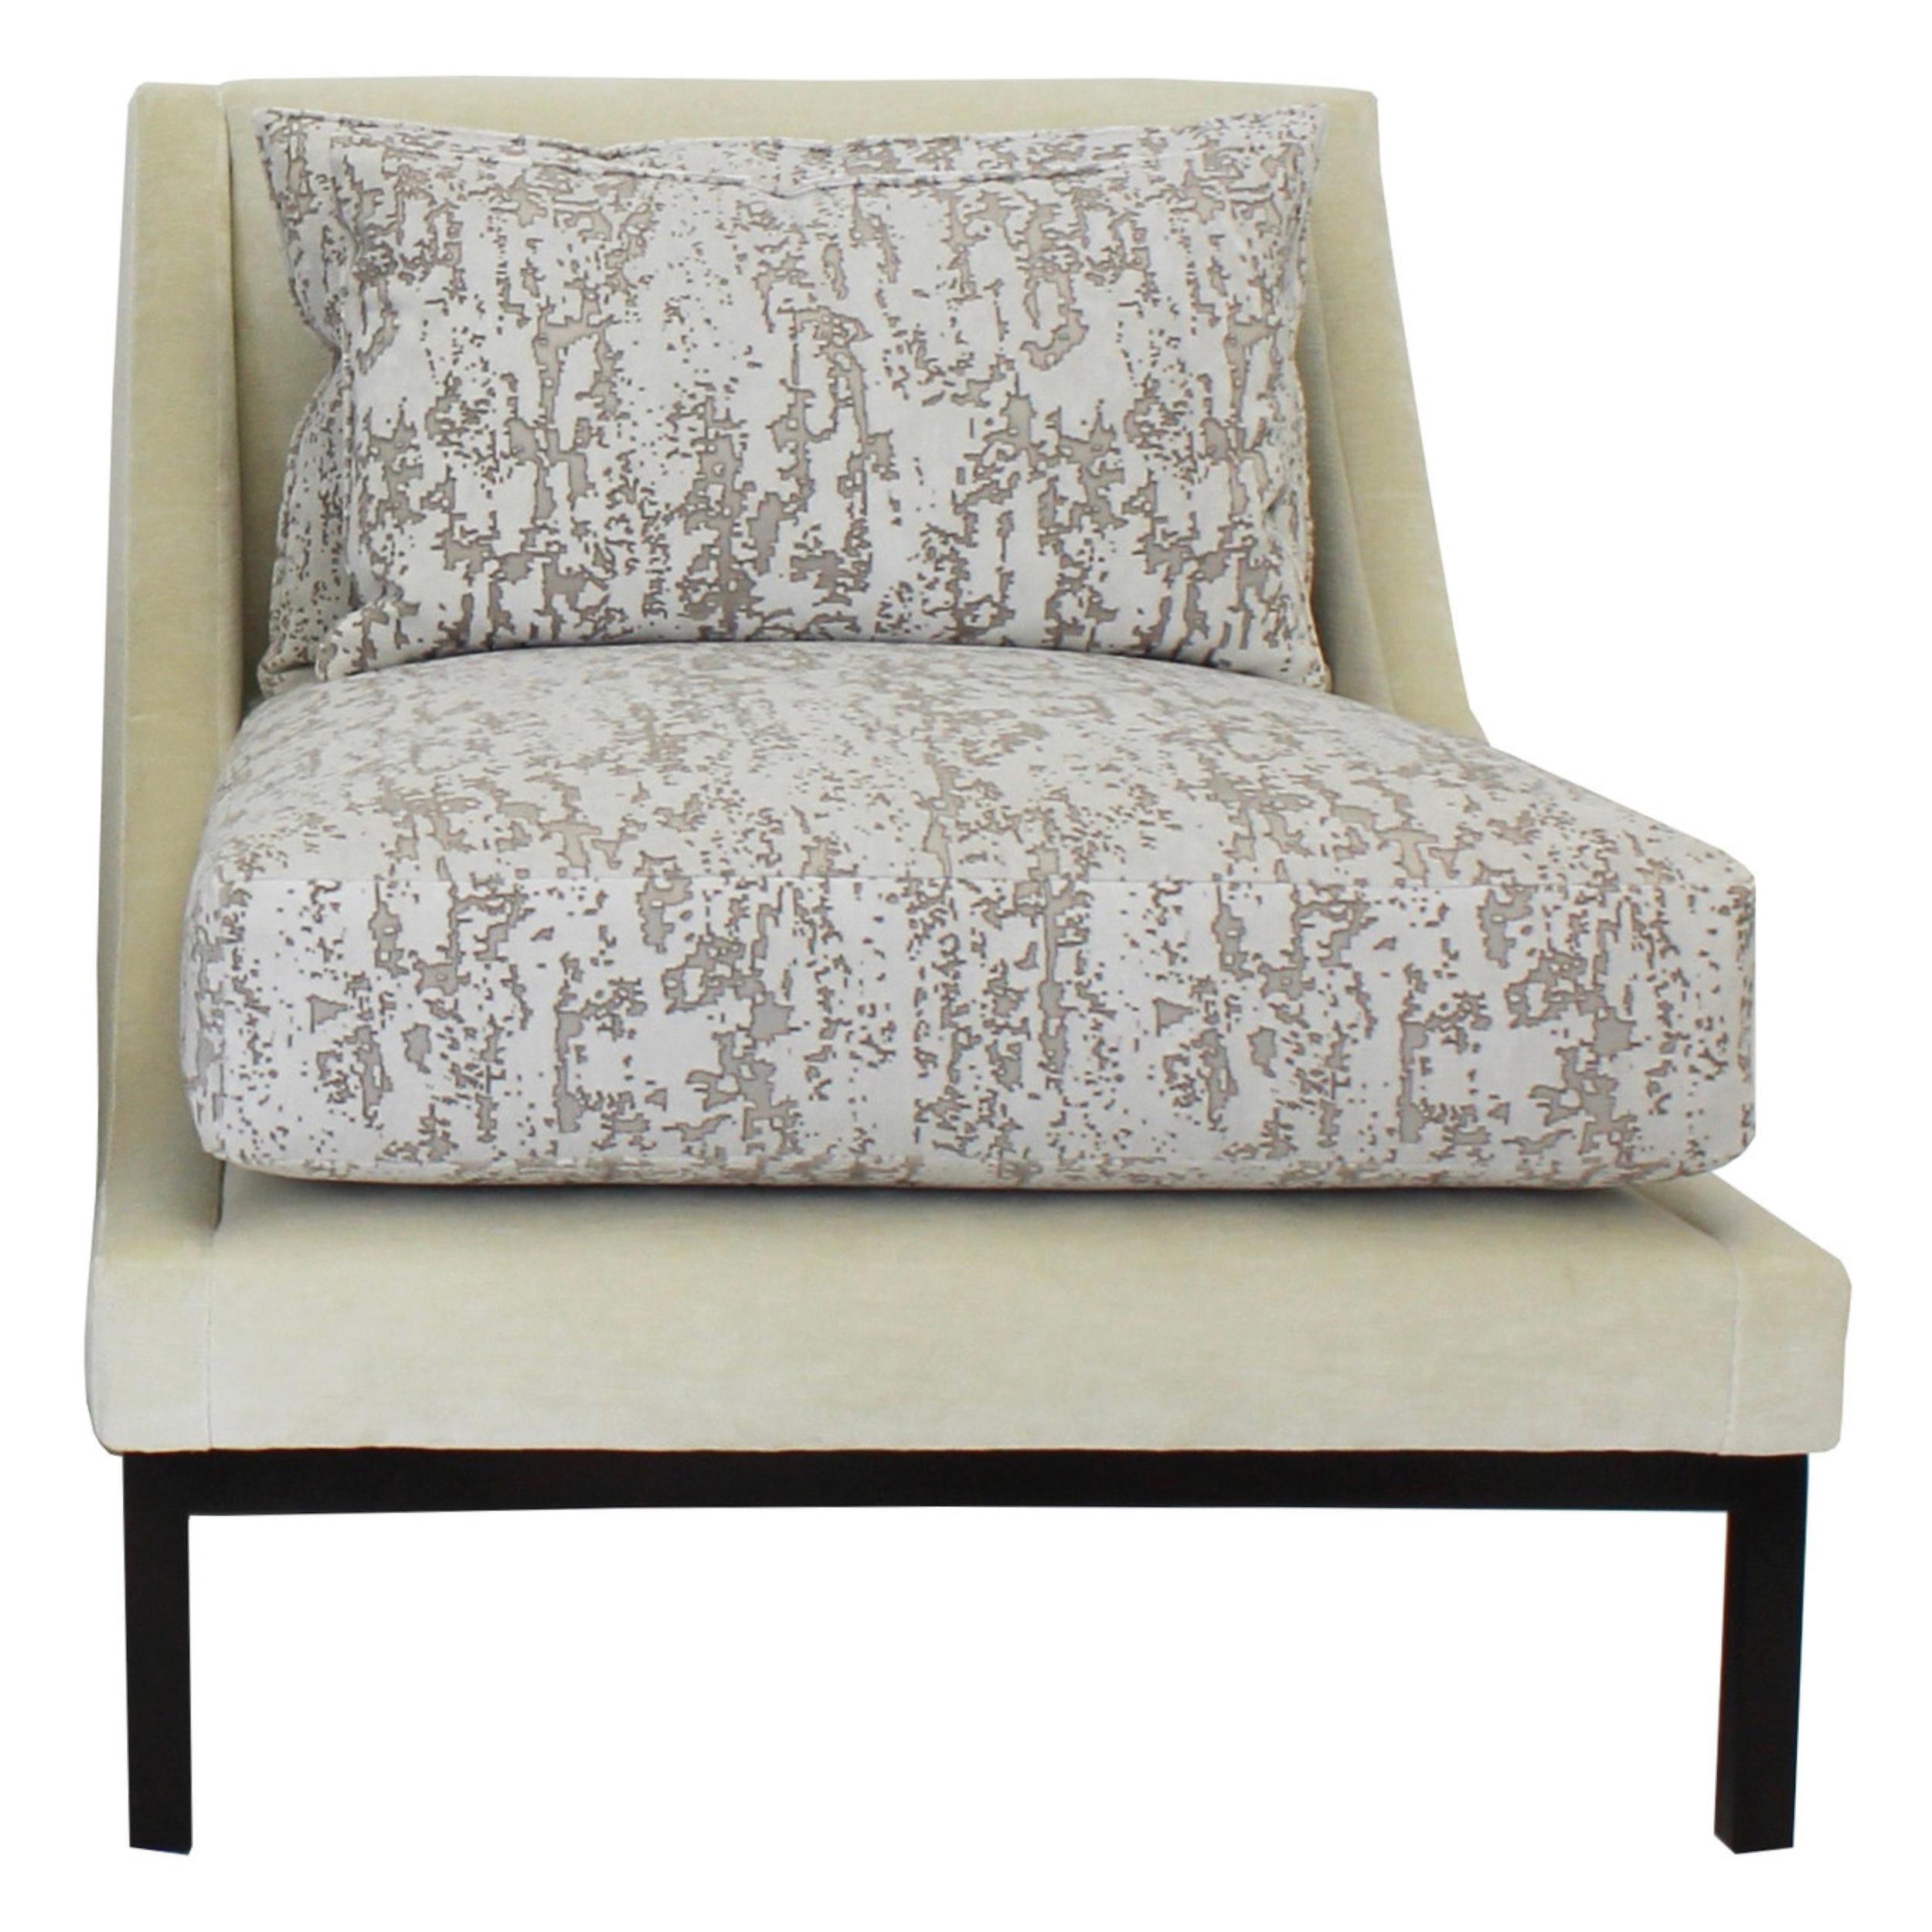 Art Deco inspired Club style chair features loose feather/down back and seat in feather/down wrapped foam. Shown in a Zinc jacquard velvet fabric with a unique burnt-out appearance and an abstract, textural design reminiscent of cork. The frame is